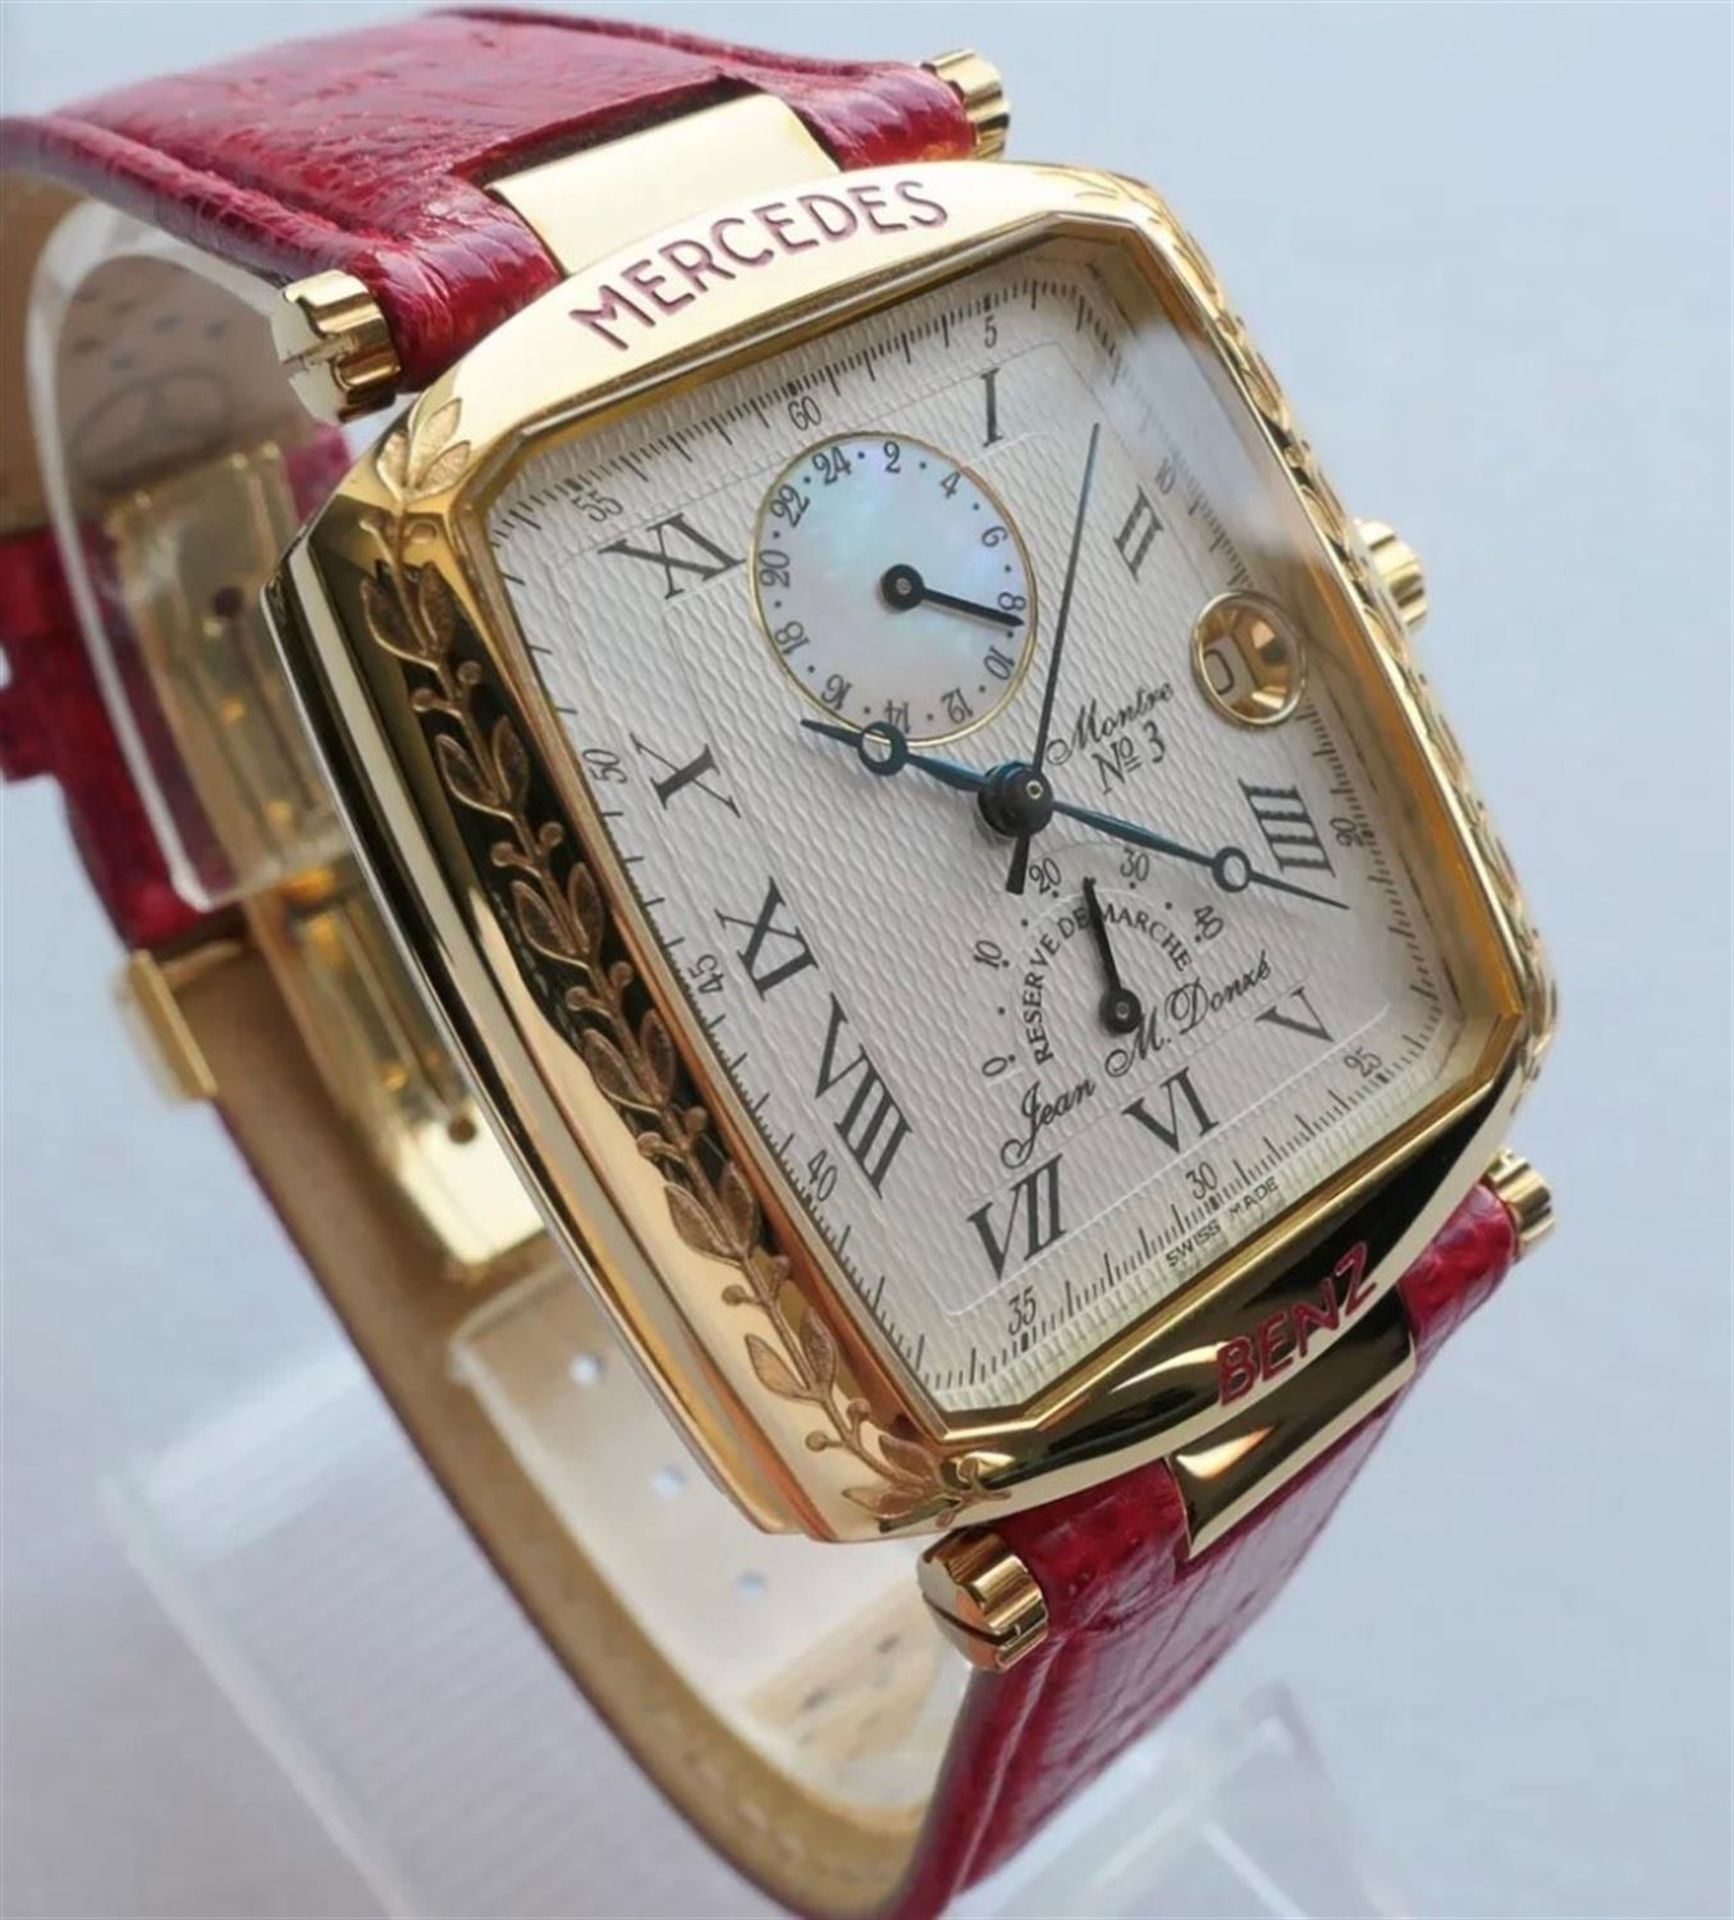 A 18ct Gold-Plated Mercedes-Benz Swiss-Made Automatic Wrist Watch - Image 5 of 10